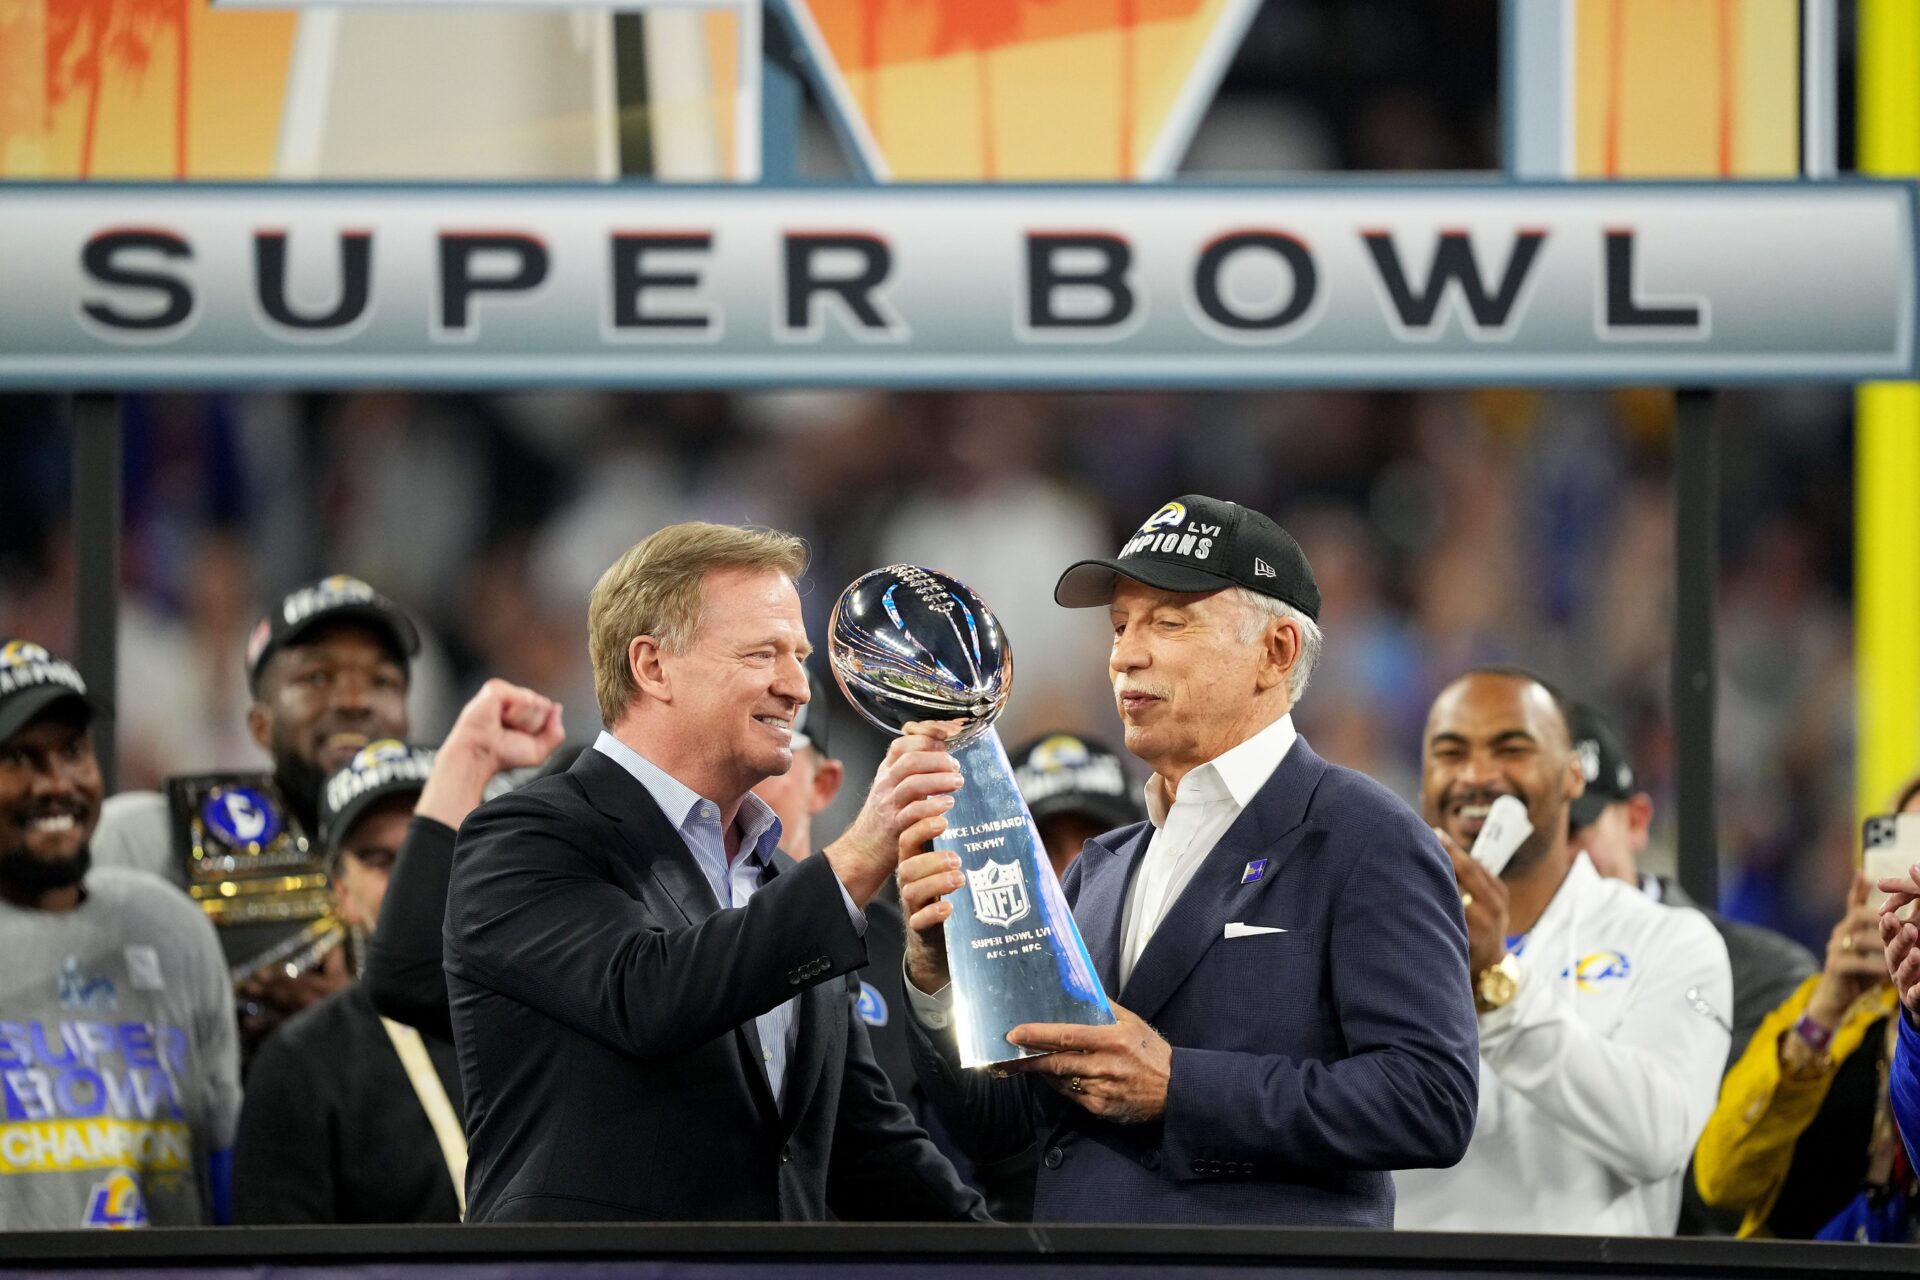 List of Super Bowl Winners by Year